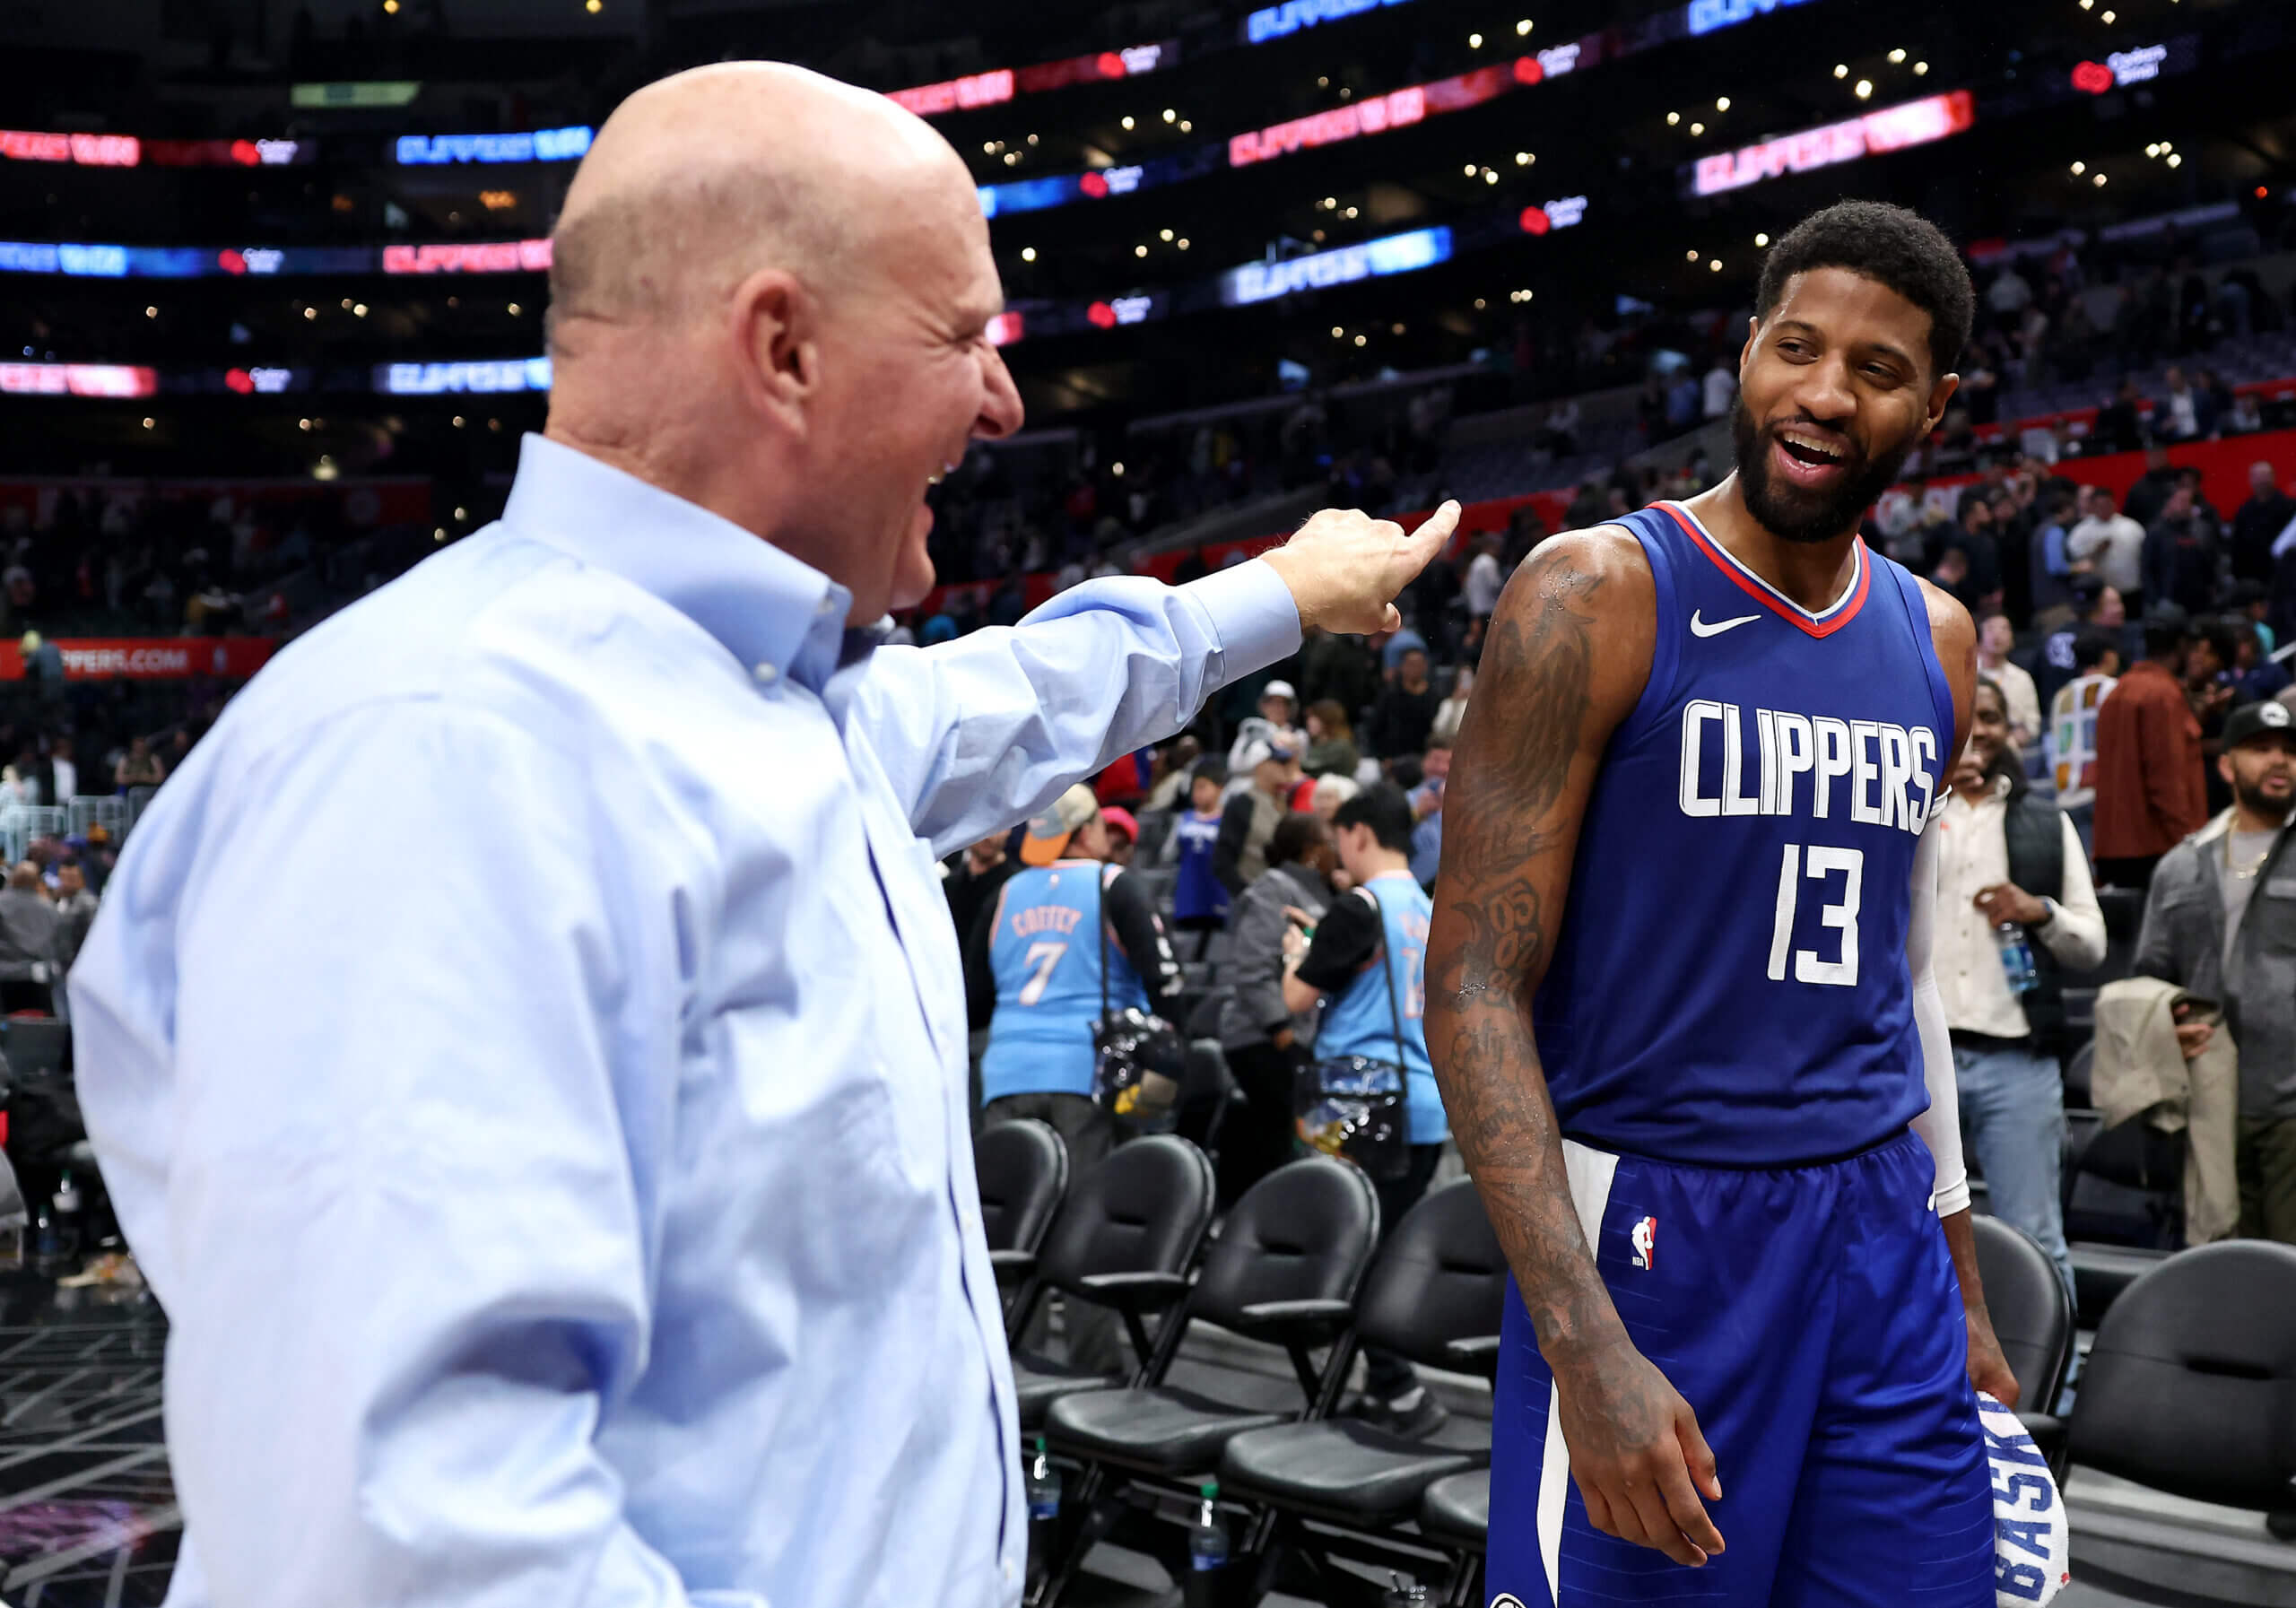 How Steve Ballmer reset Clippers culture after Donald Sterling scandal